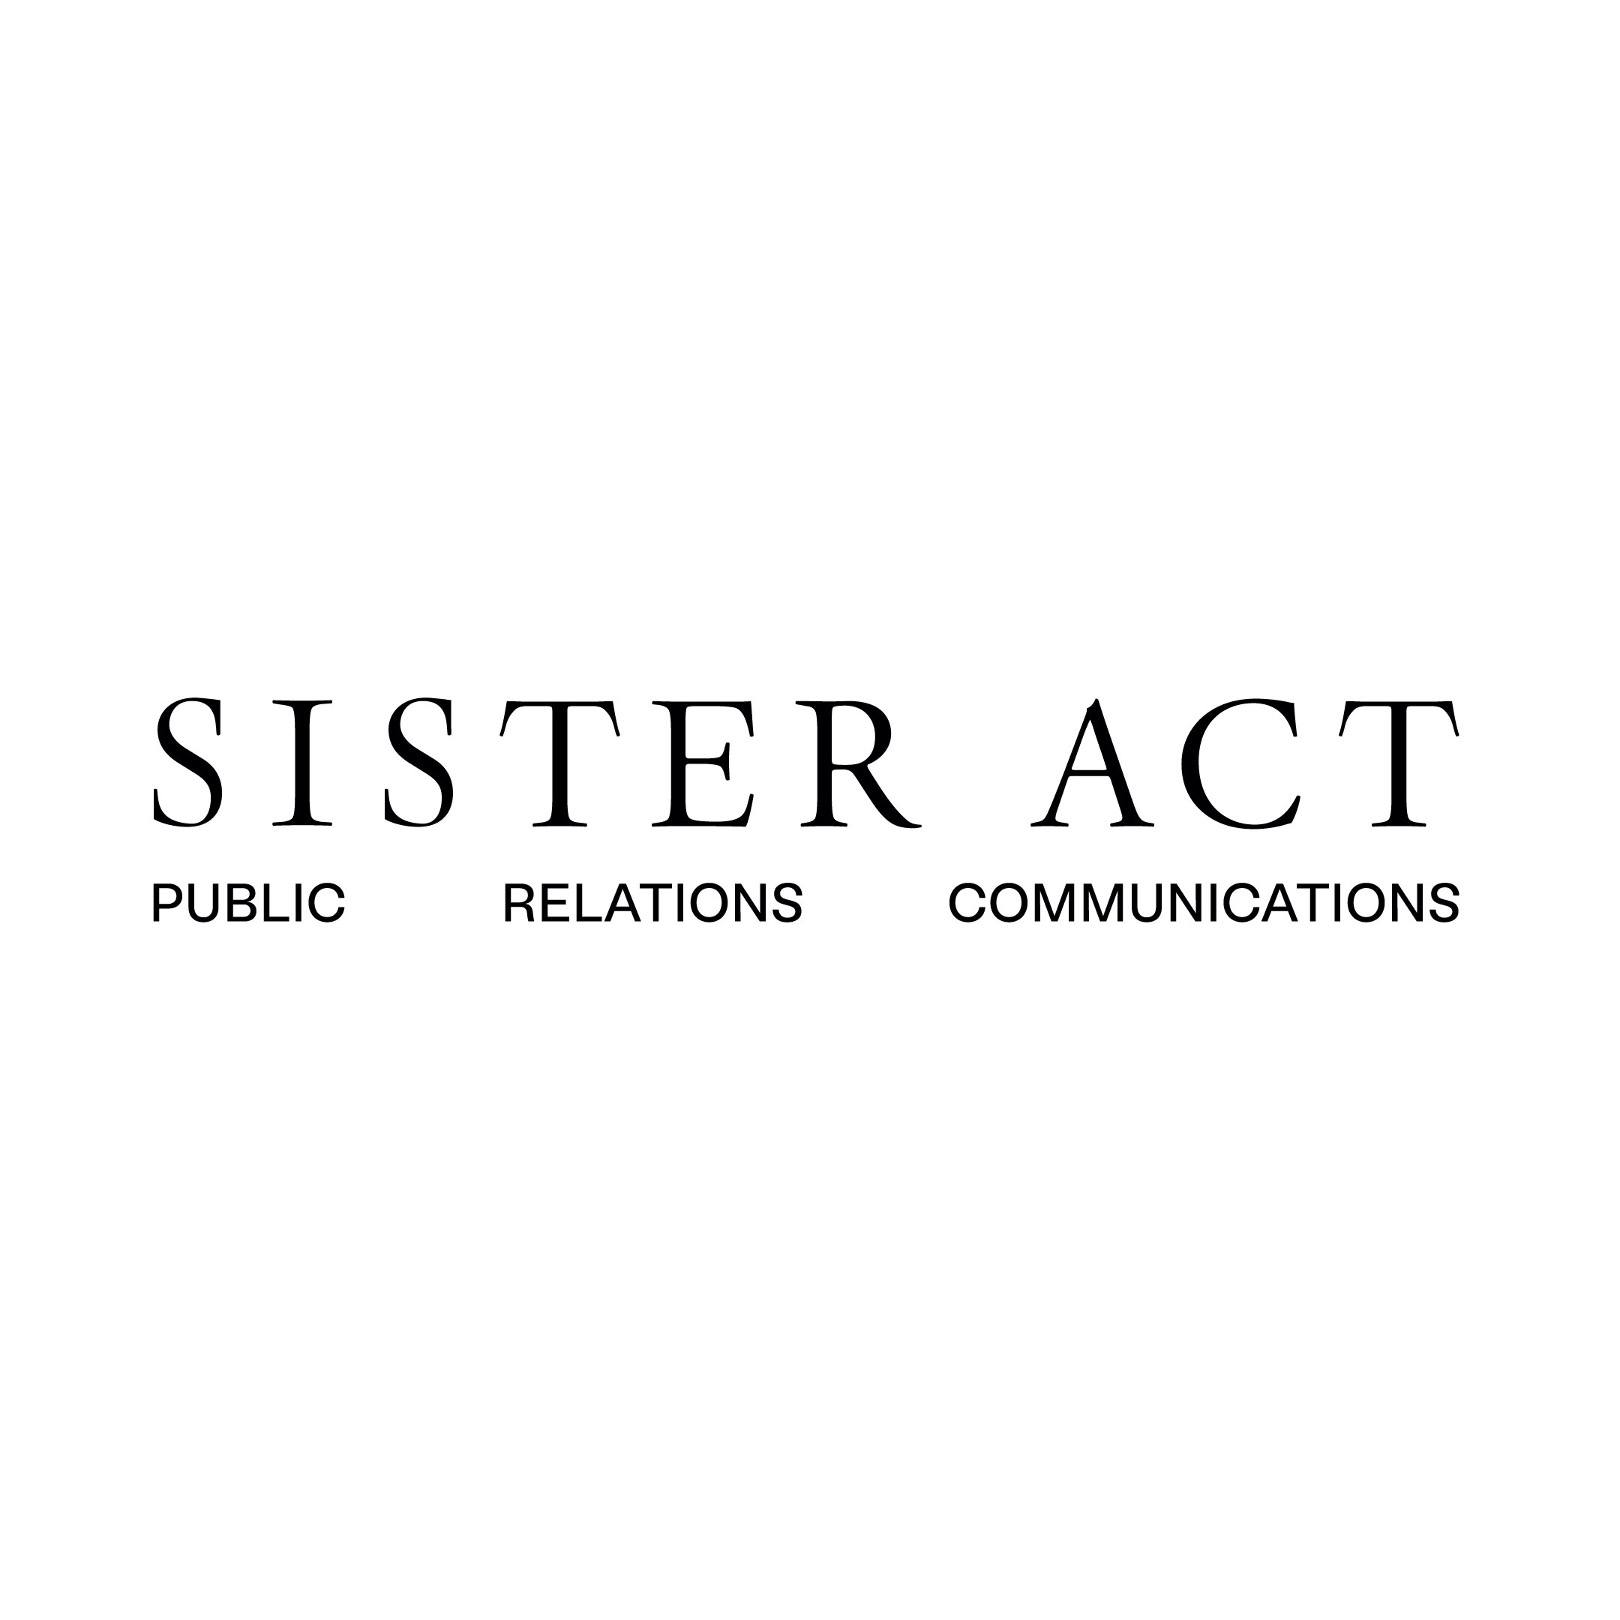 SISTER ACT Public Relations & Communications